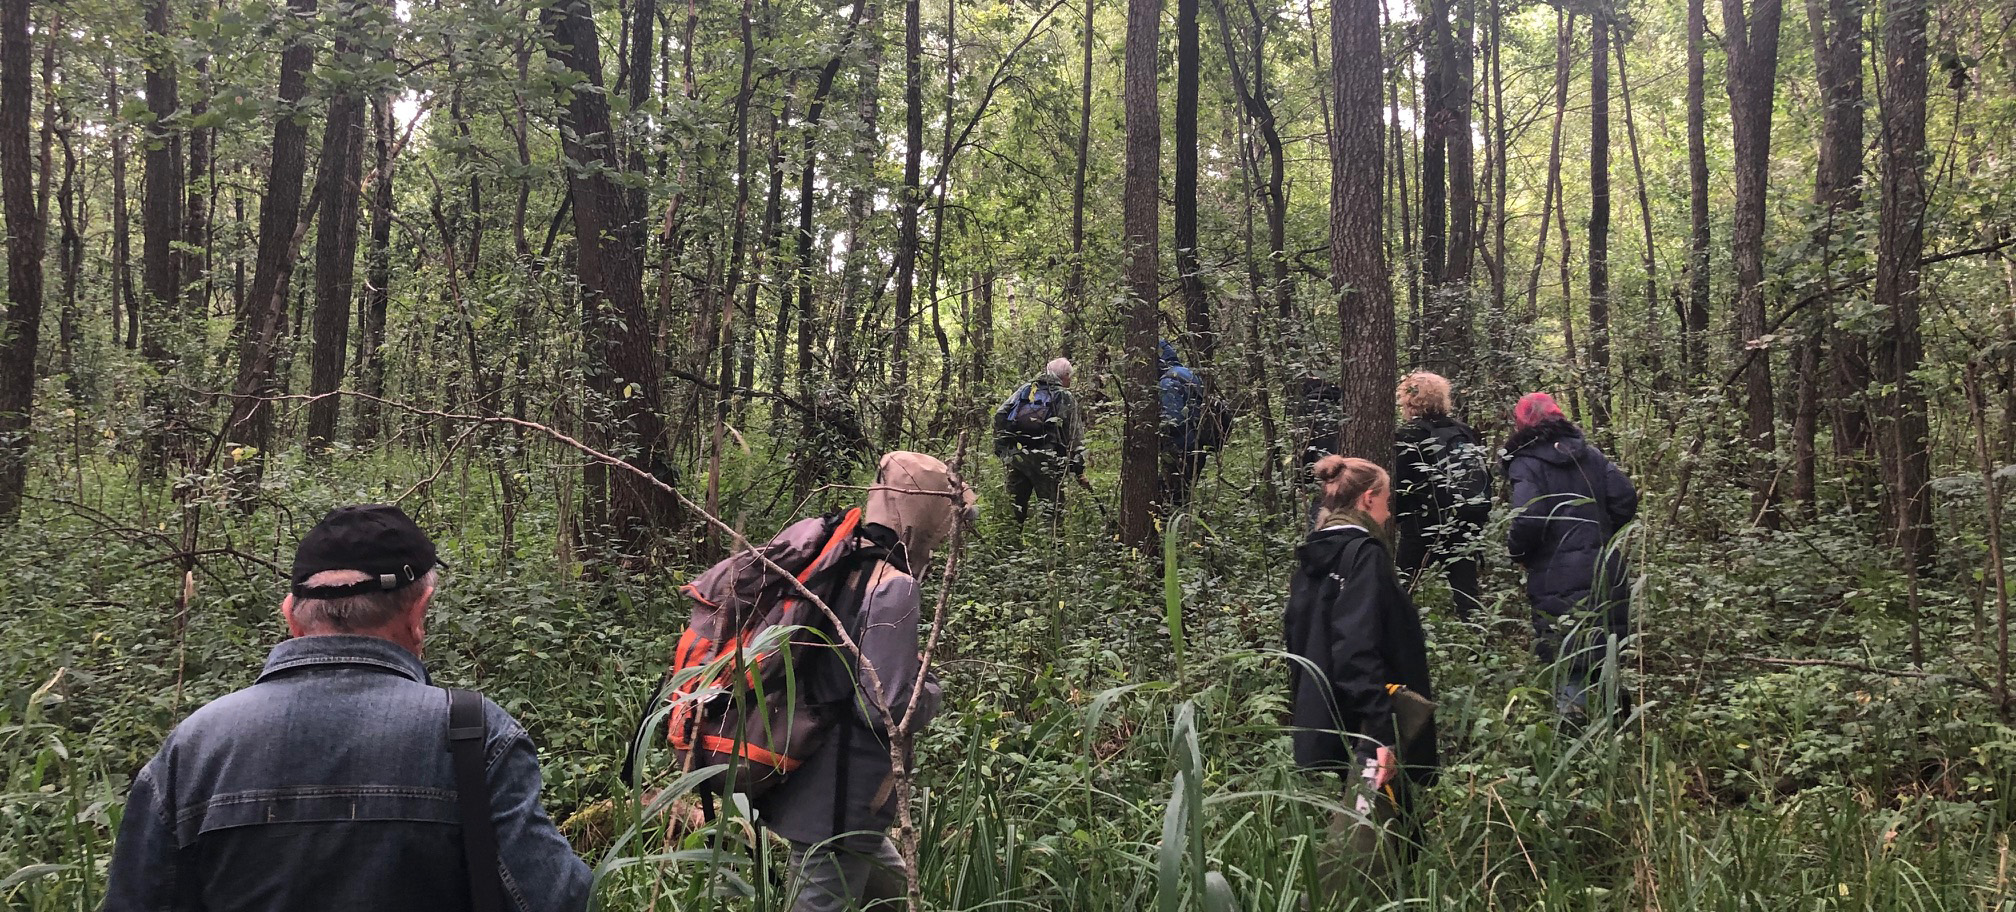 students in forest walking through trees with backpacks 